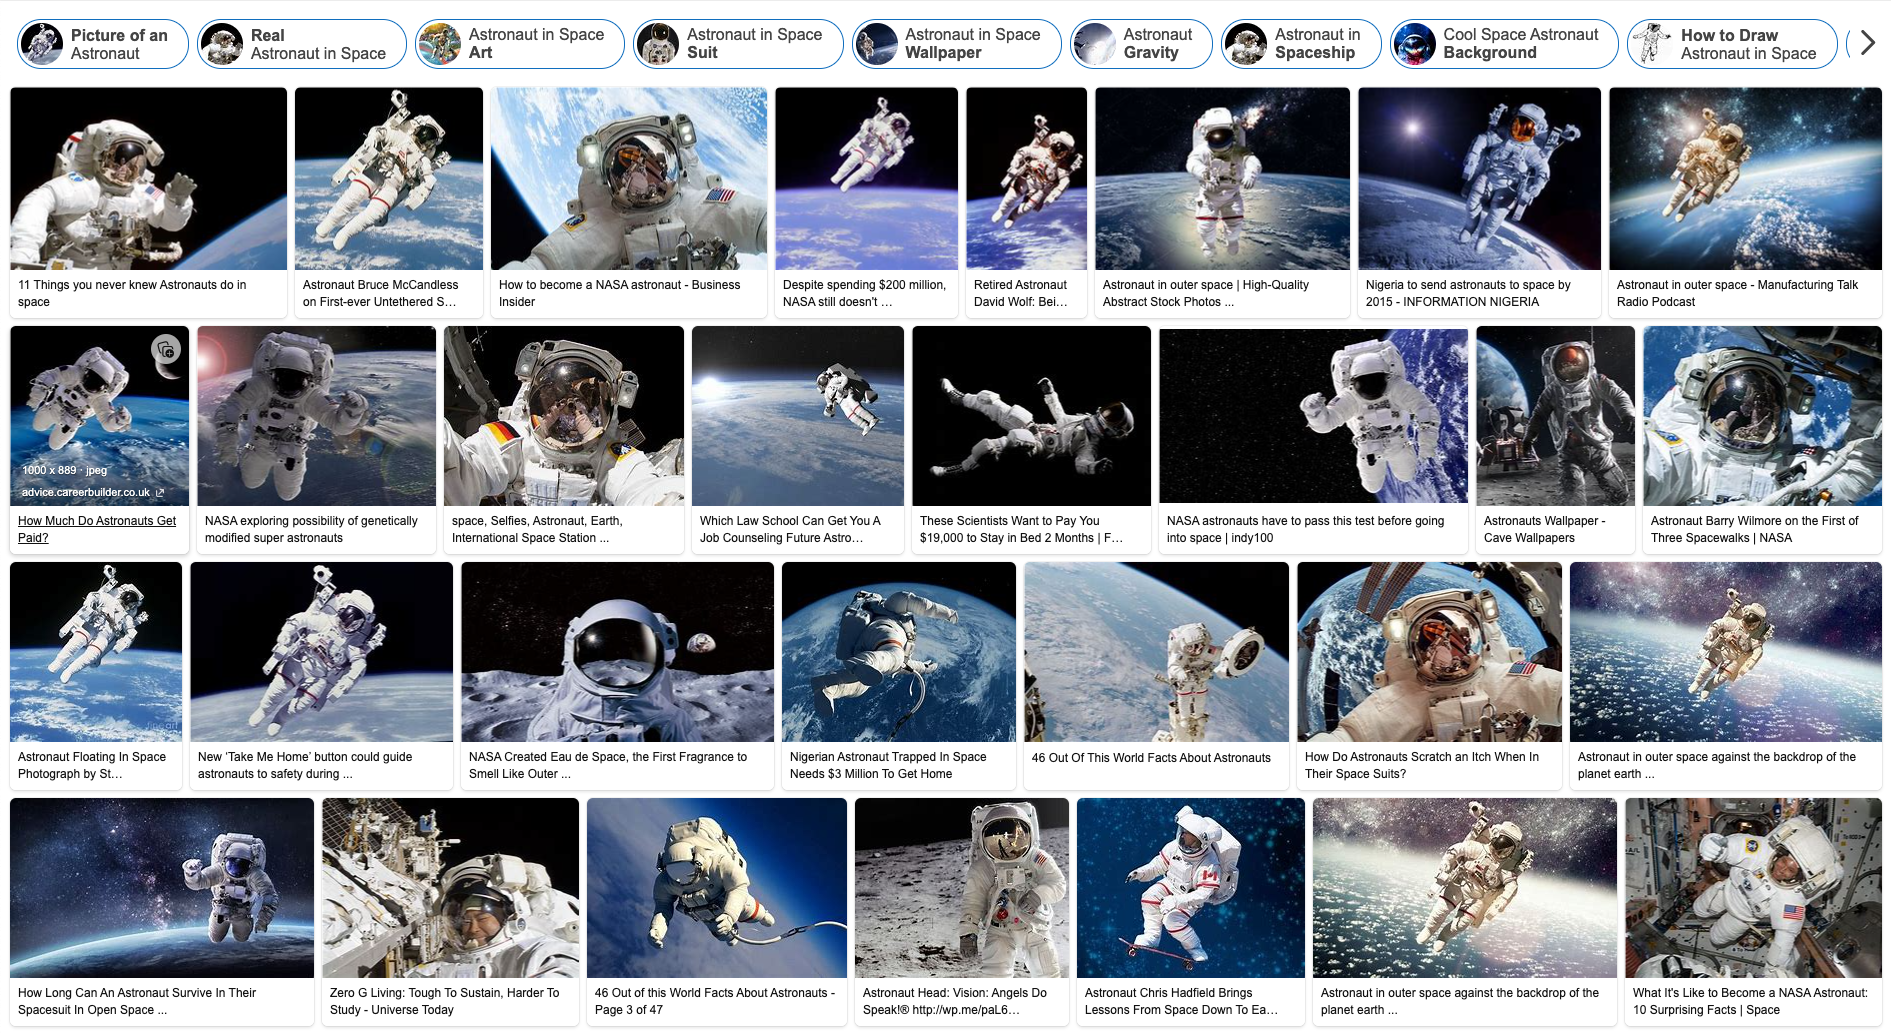 Bing image results for “astronaut in space” 